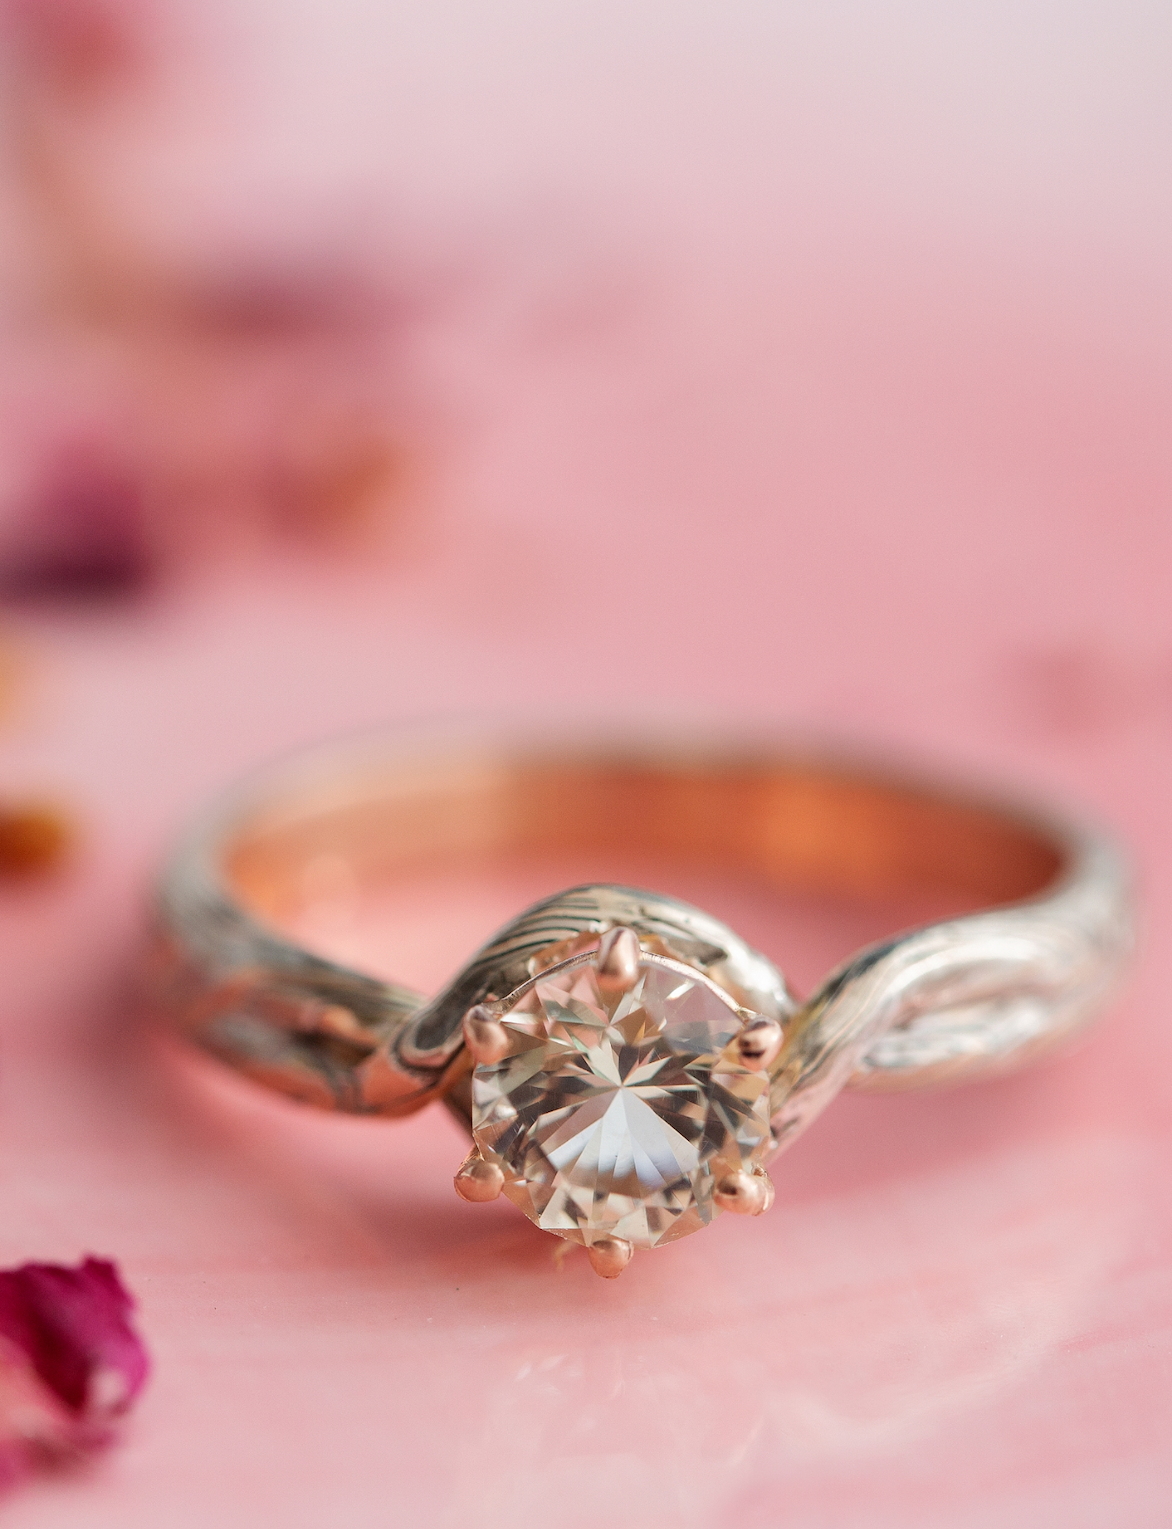 A ring made of rose gold mokume gane made of layers of rose gold, white gold, and silver placed on a pink background surrounded with rose petals